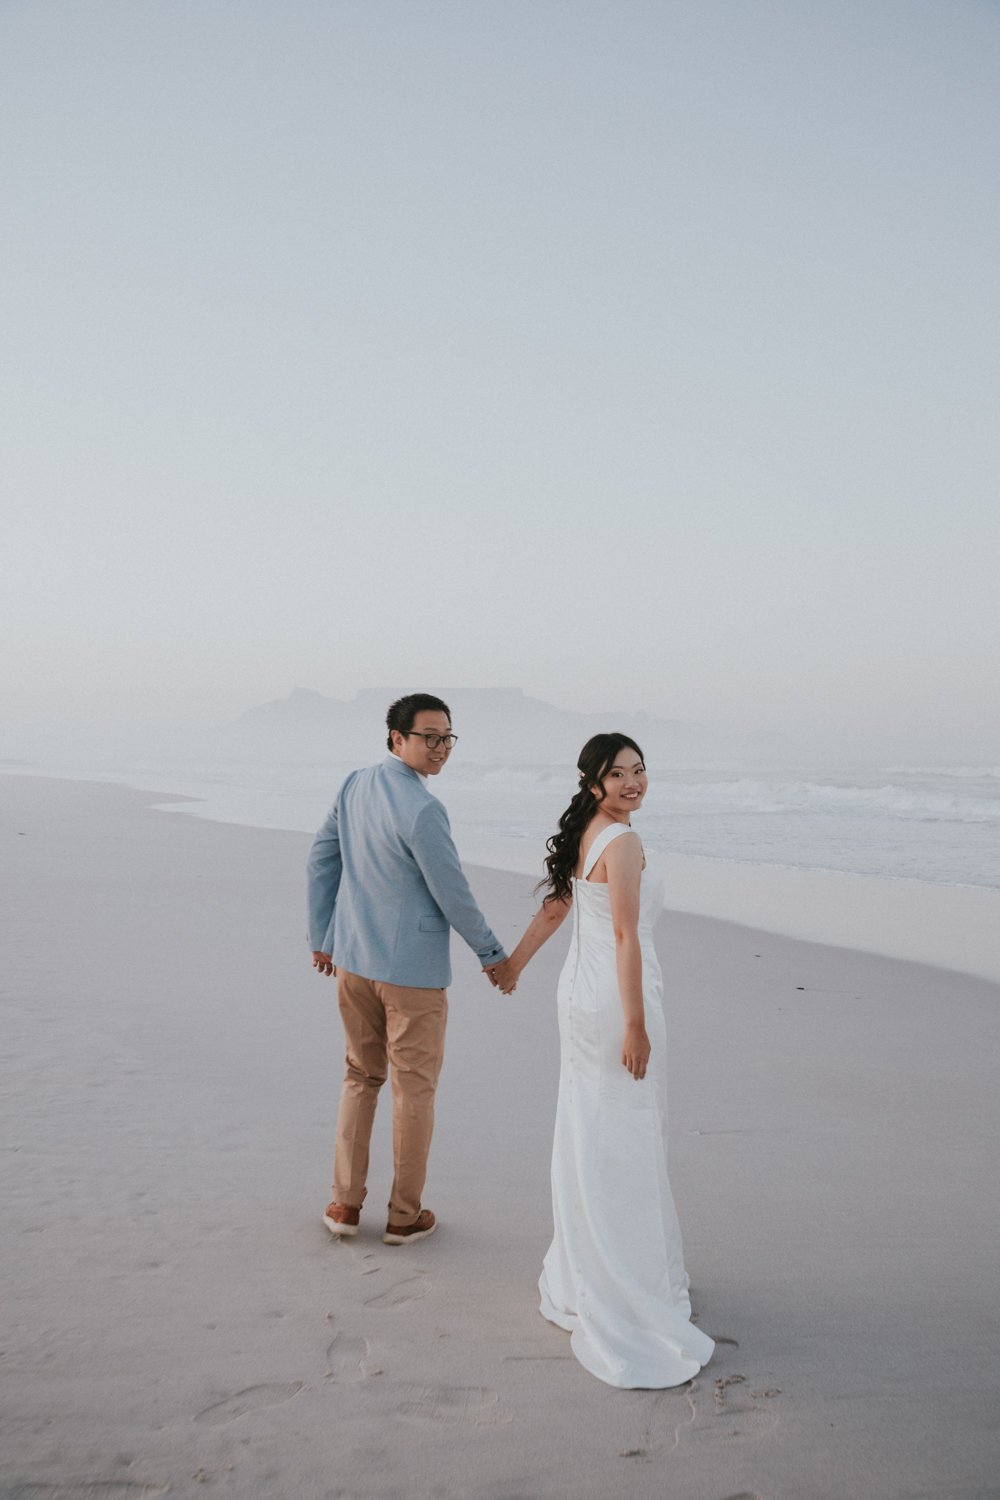 Wedding Shoot in Cape Town - Bianca Asher Photography-4.jpg